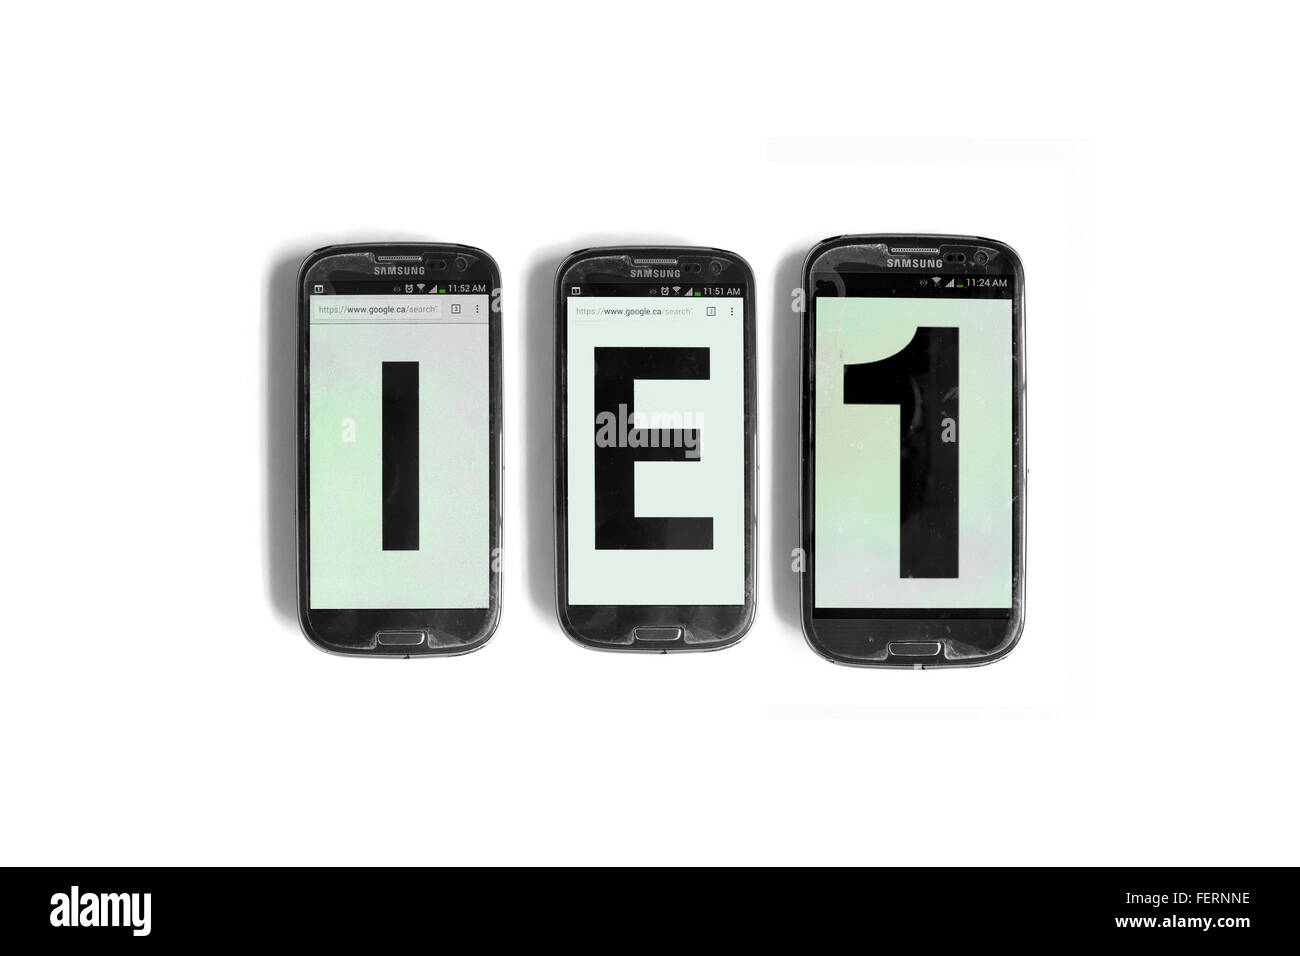 IE1 on the screens of smartphones photographed against a  white background. Stock Photo